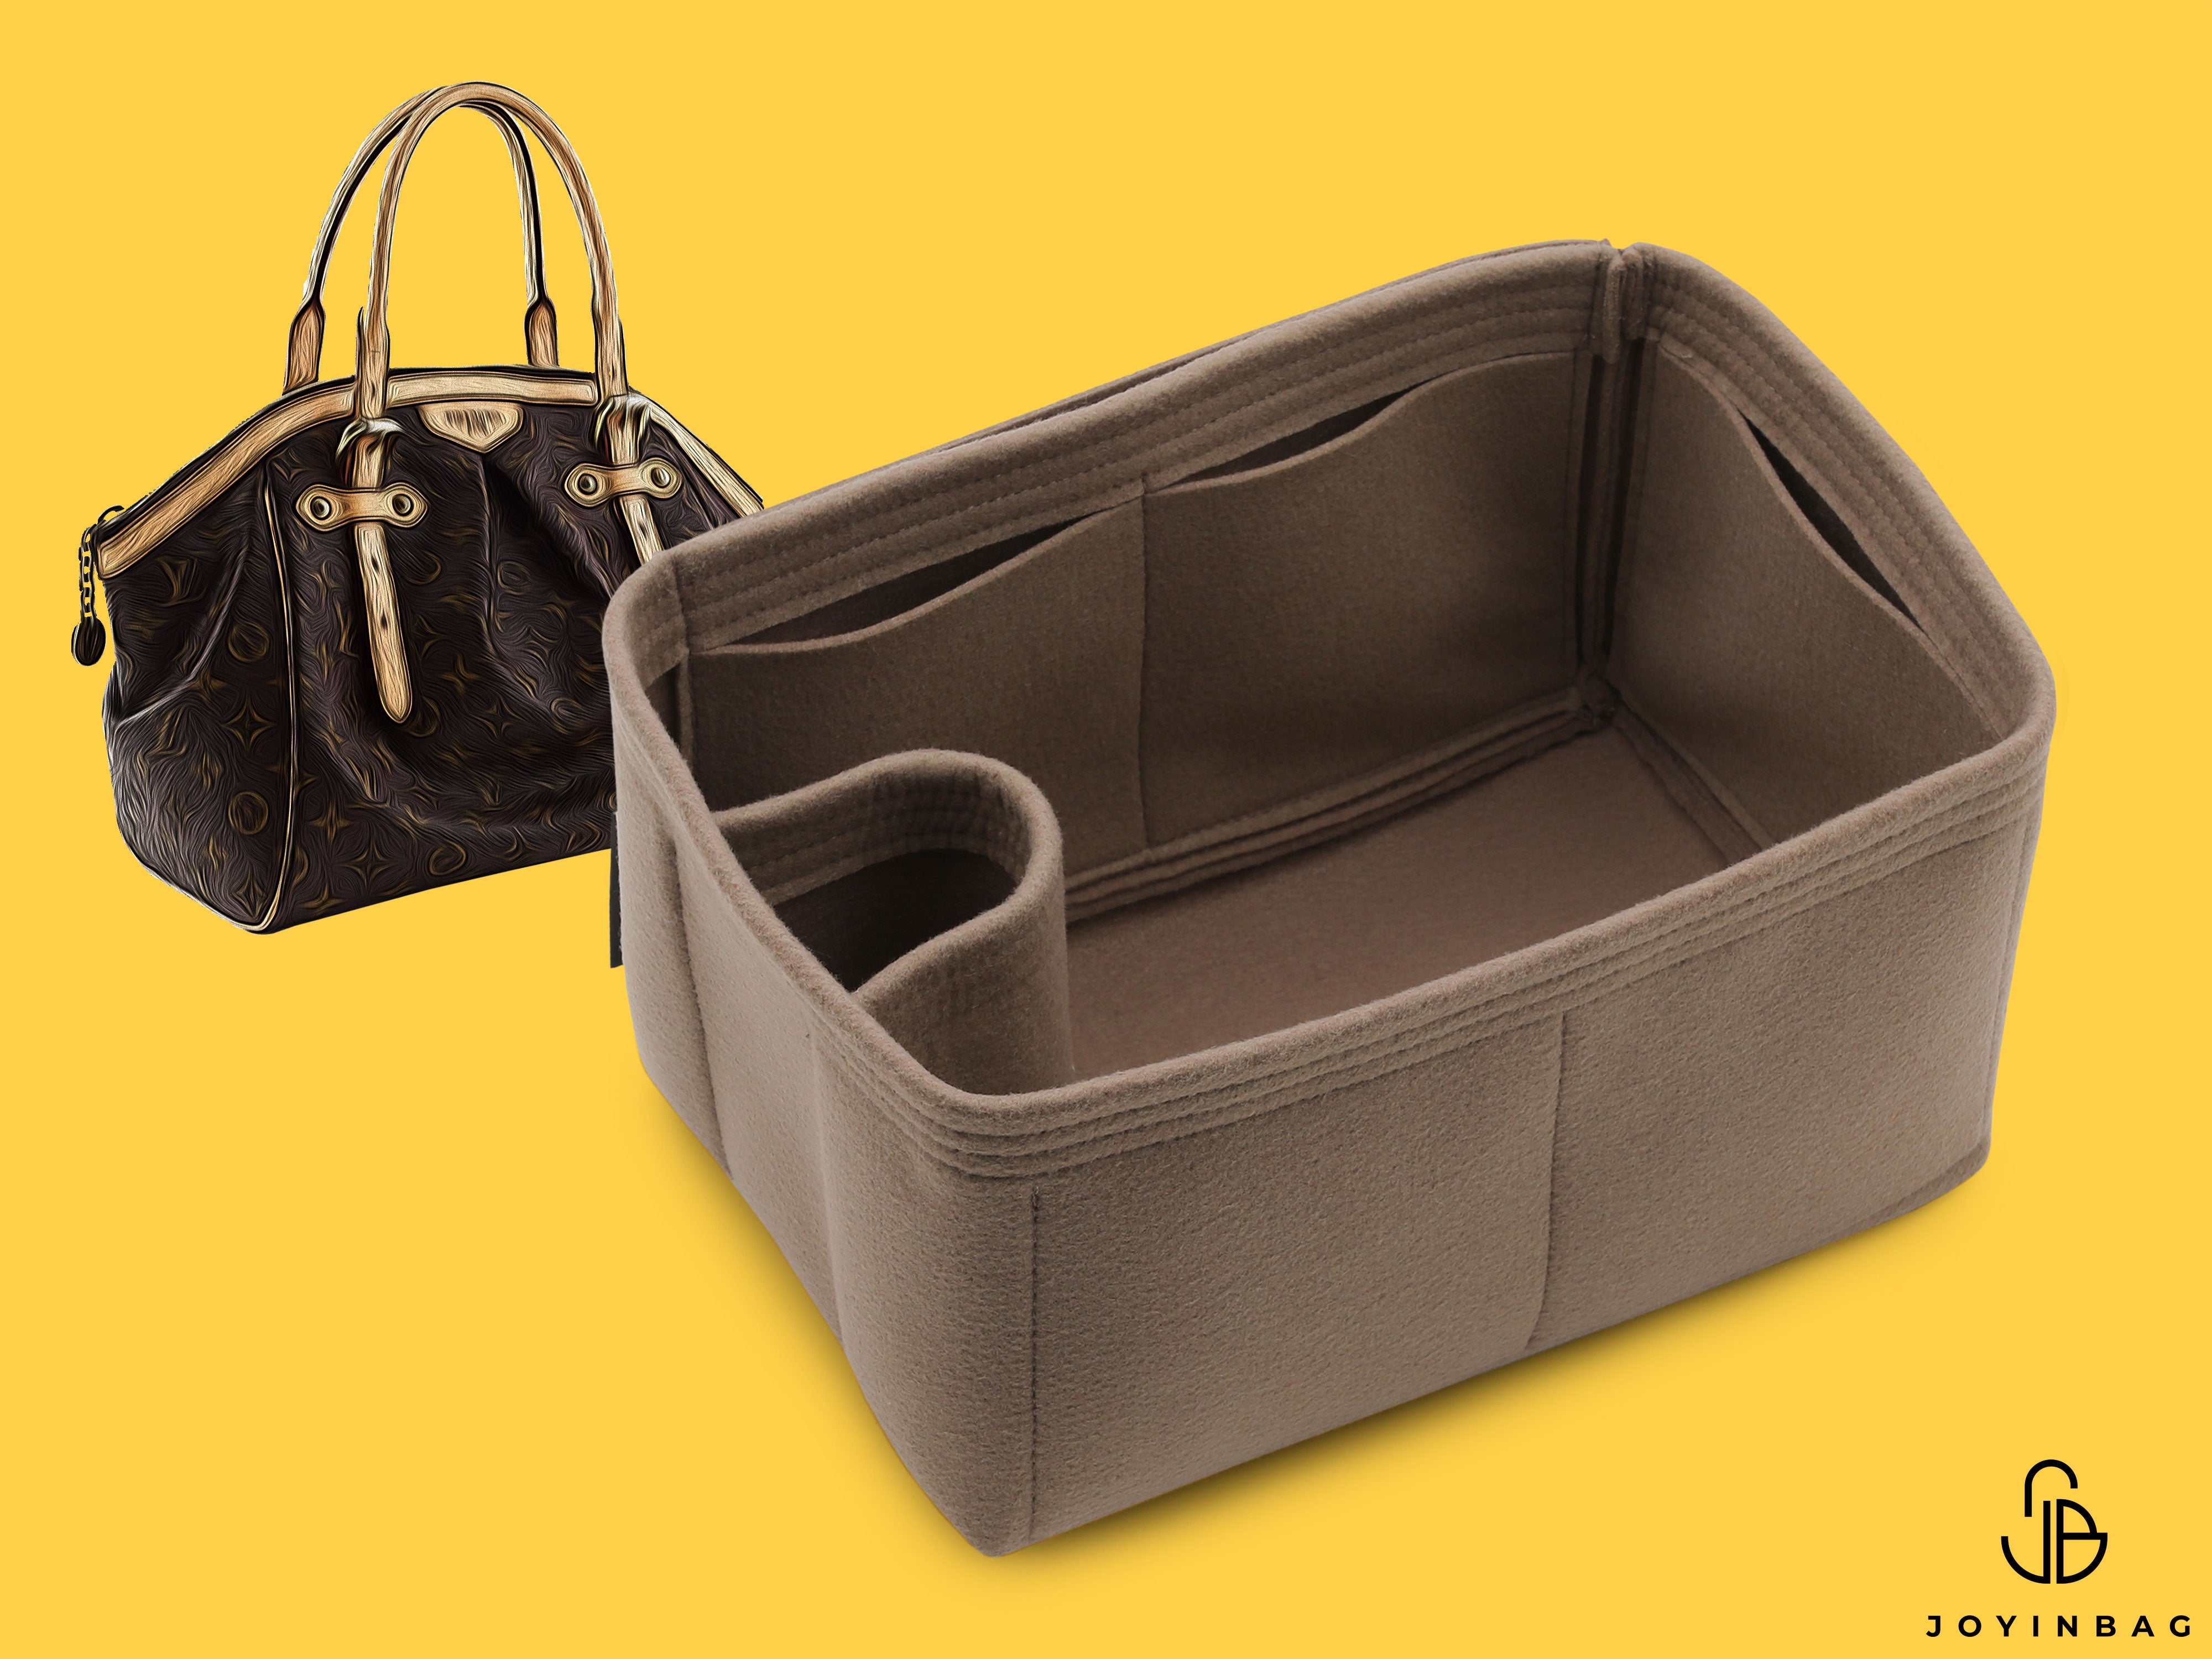 Bag and Purse Organizer with Regular Style for Louis Vuitton